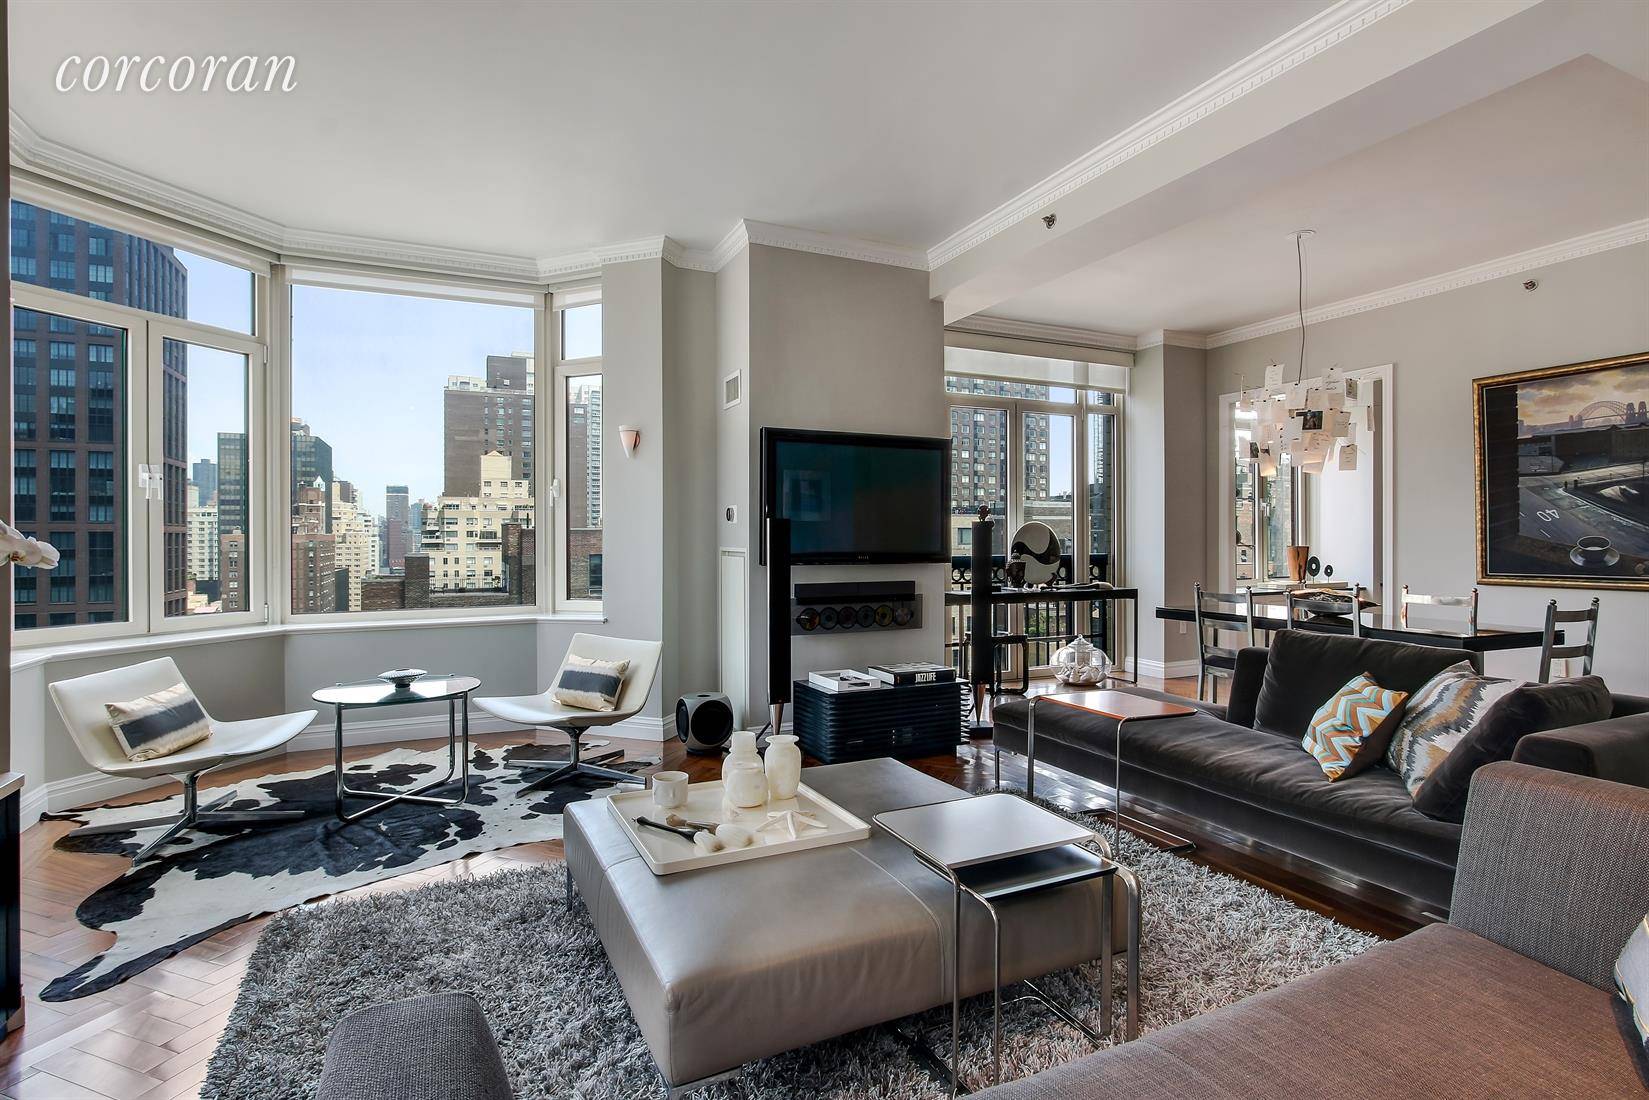 WOW ! Come live in a one of a kind, open, loft like, extra large 1812 SF, 2 bedroom 3 bathroom, strikingly beautiful apartment at the Grand Beekman condominium !